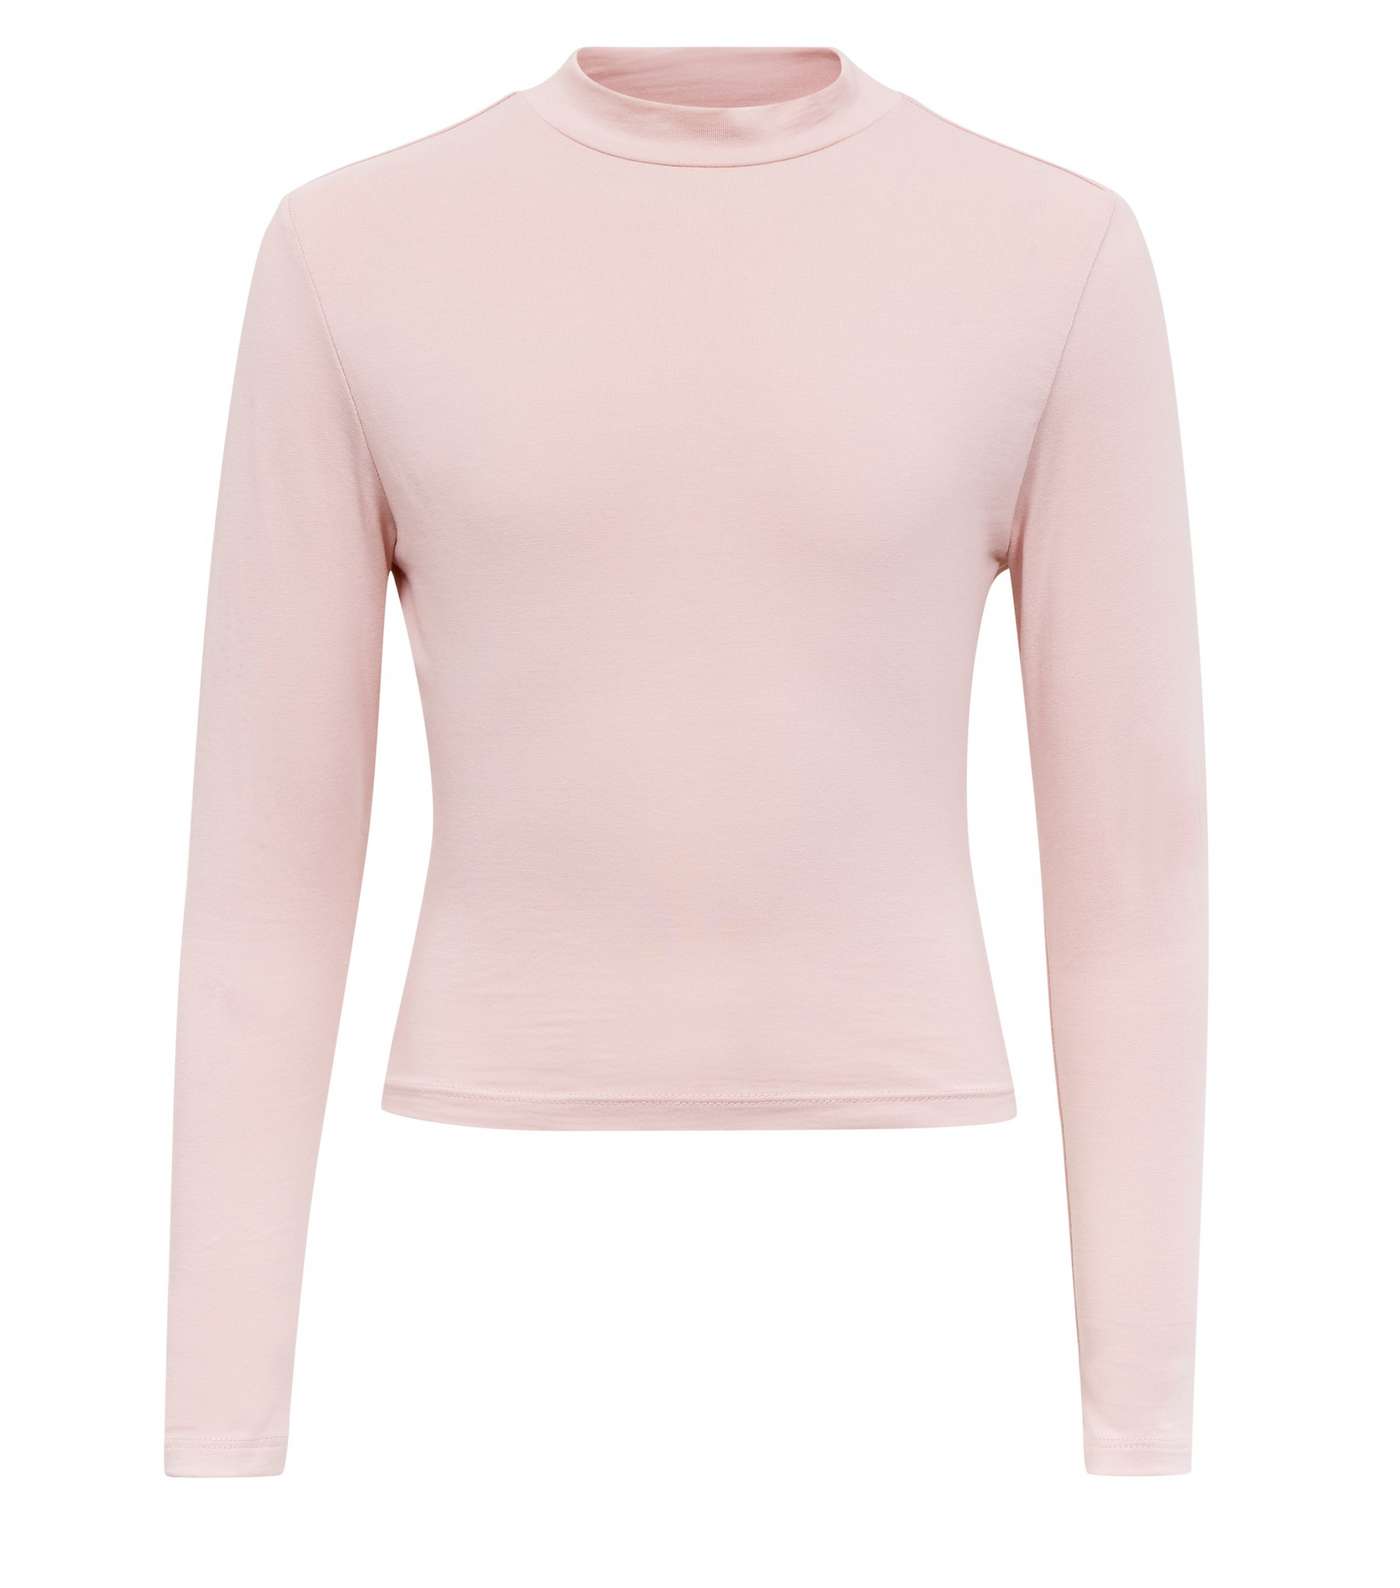 Girls Pale Pink Funnel Neck Top  Image 4